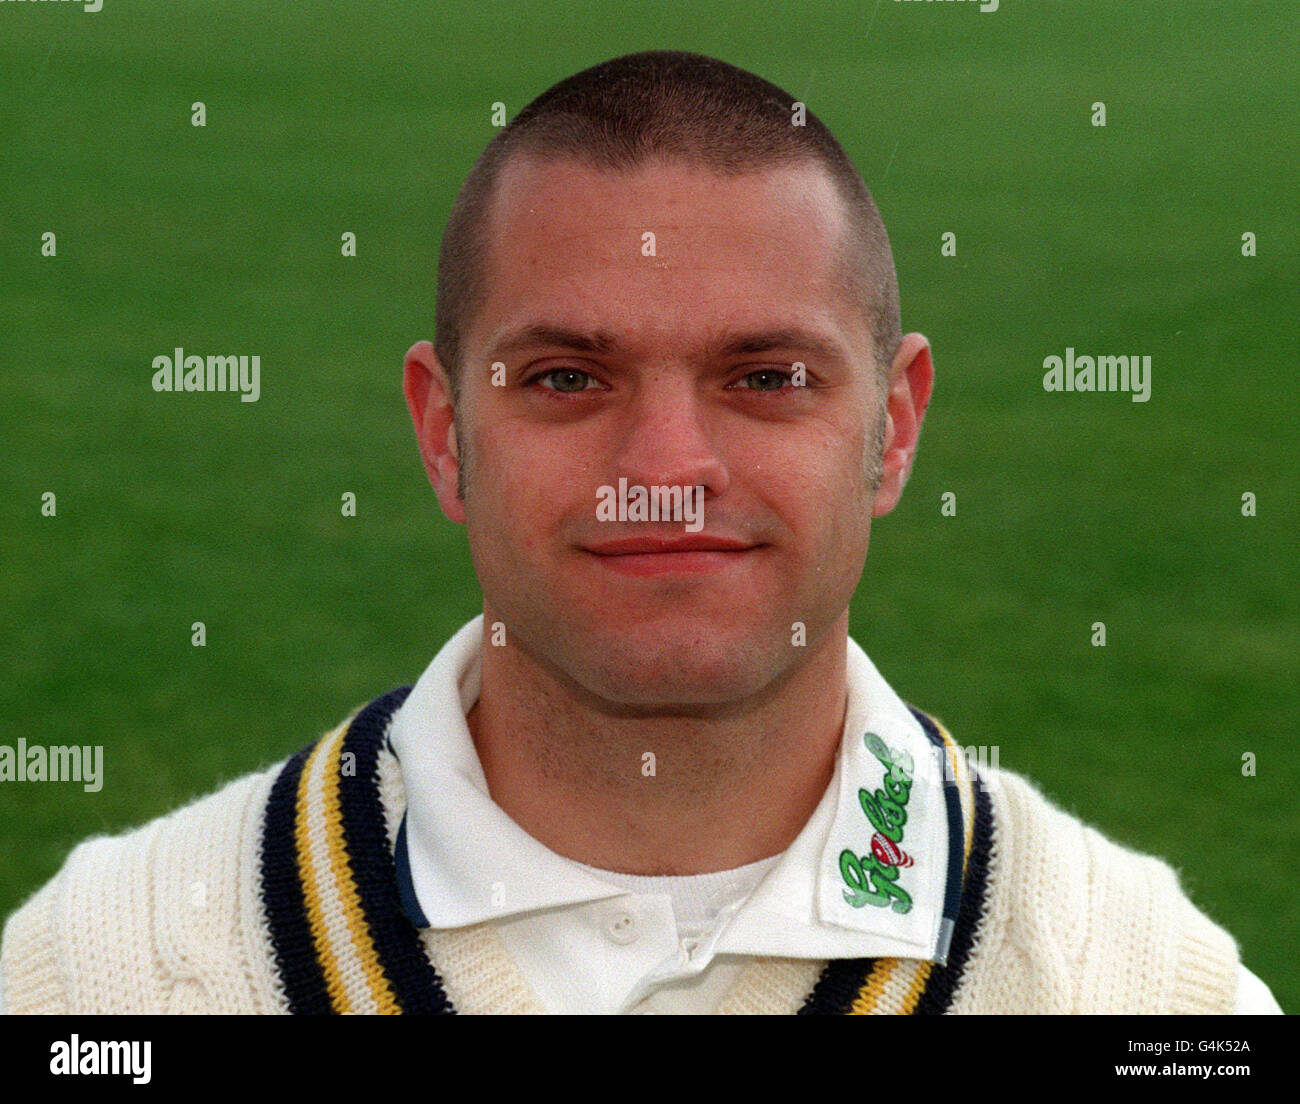 Steve Lugsden, a member of the Hampshire County Cricket Team. Stock Photo